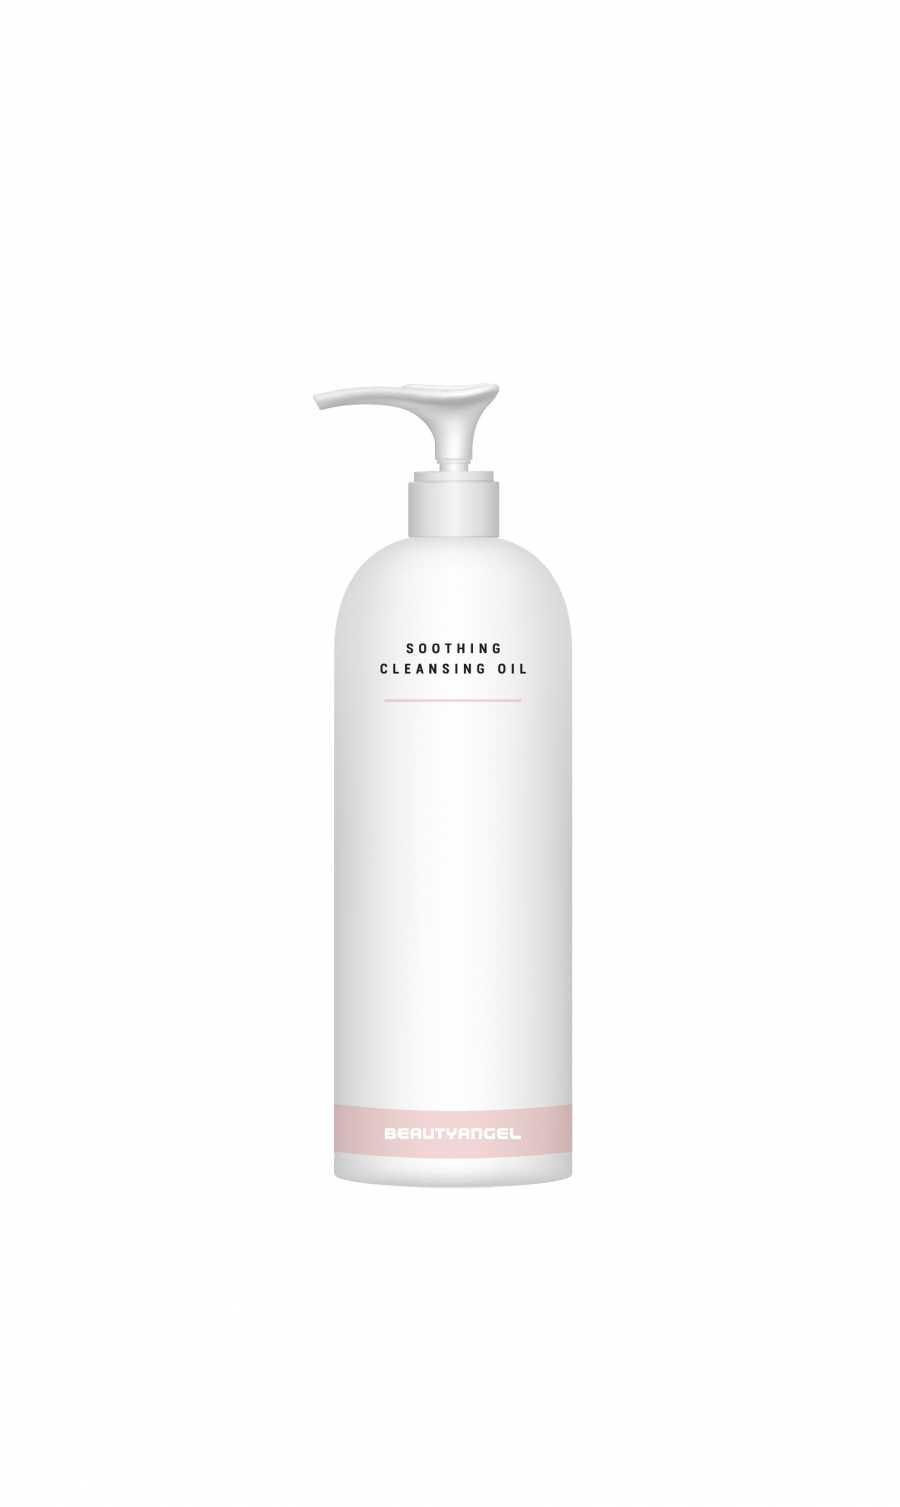 SOOTHING CLEANSING OIL